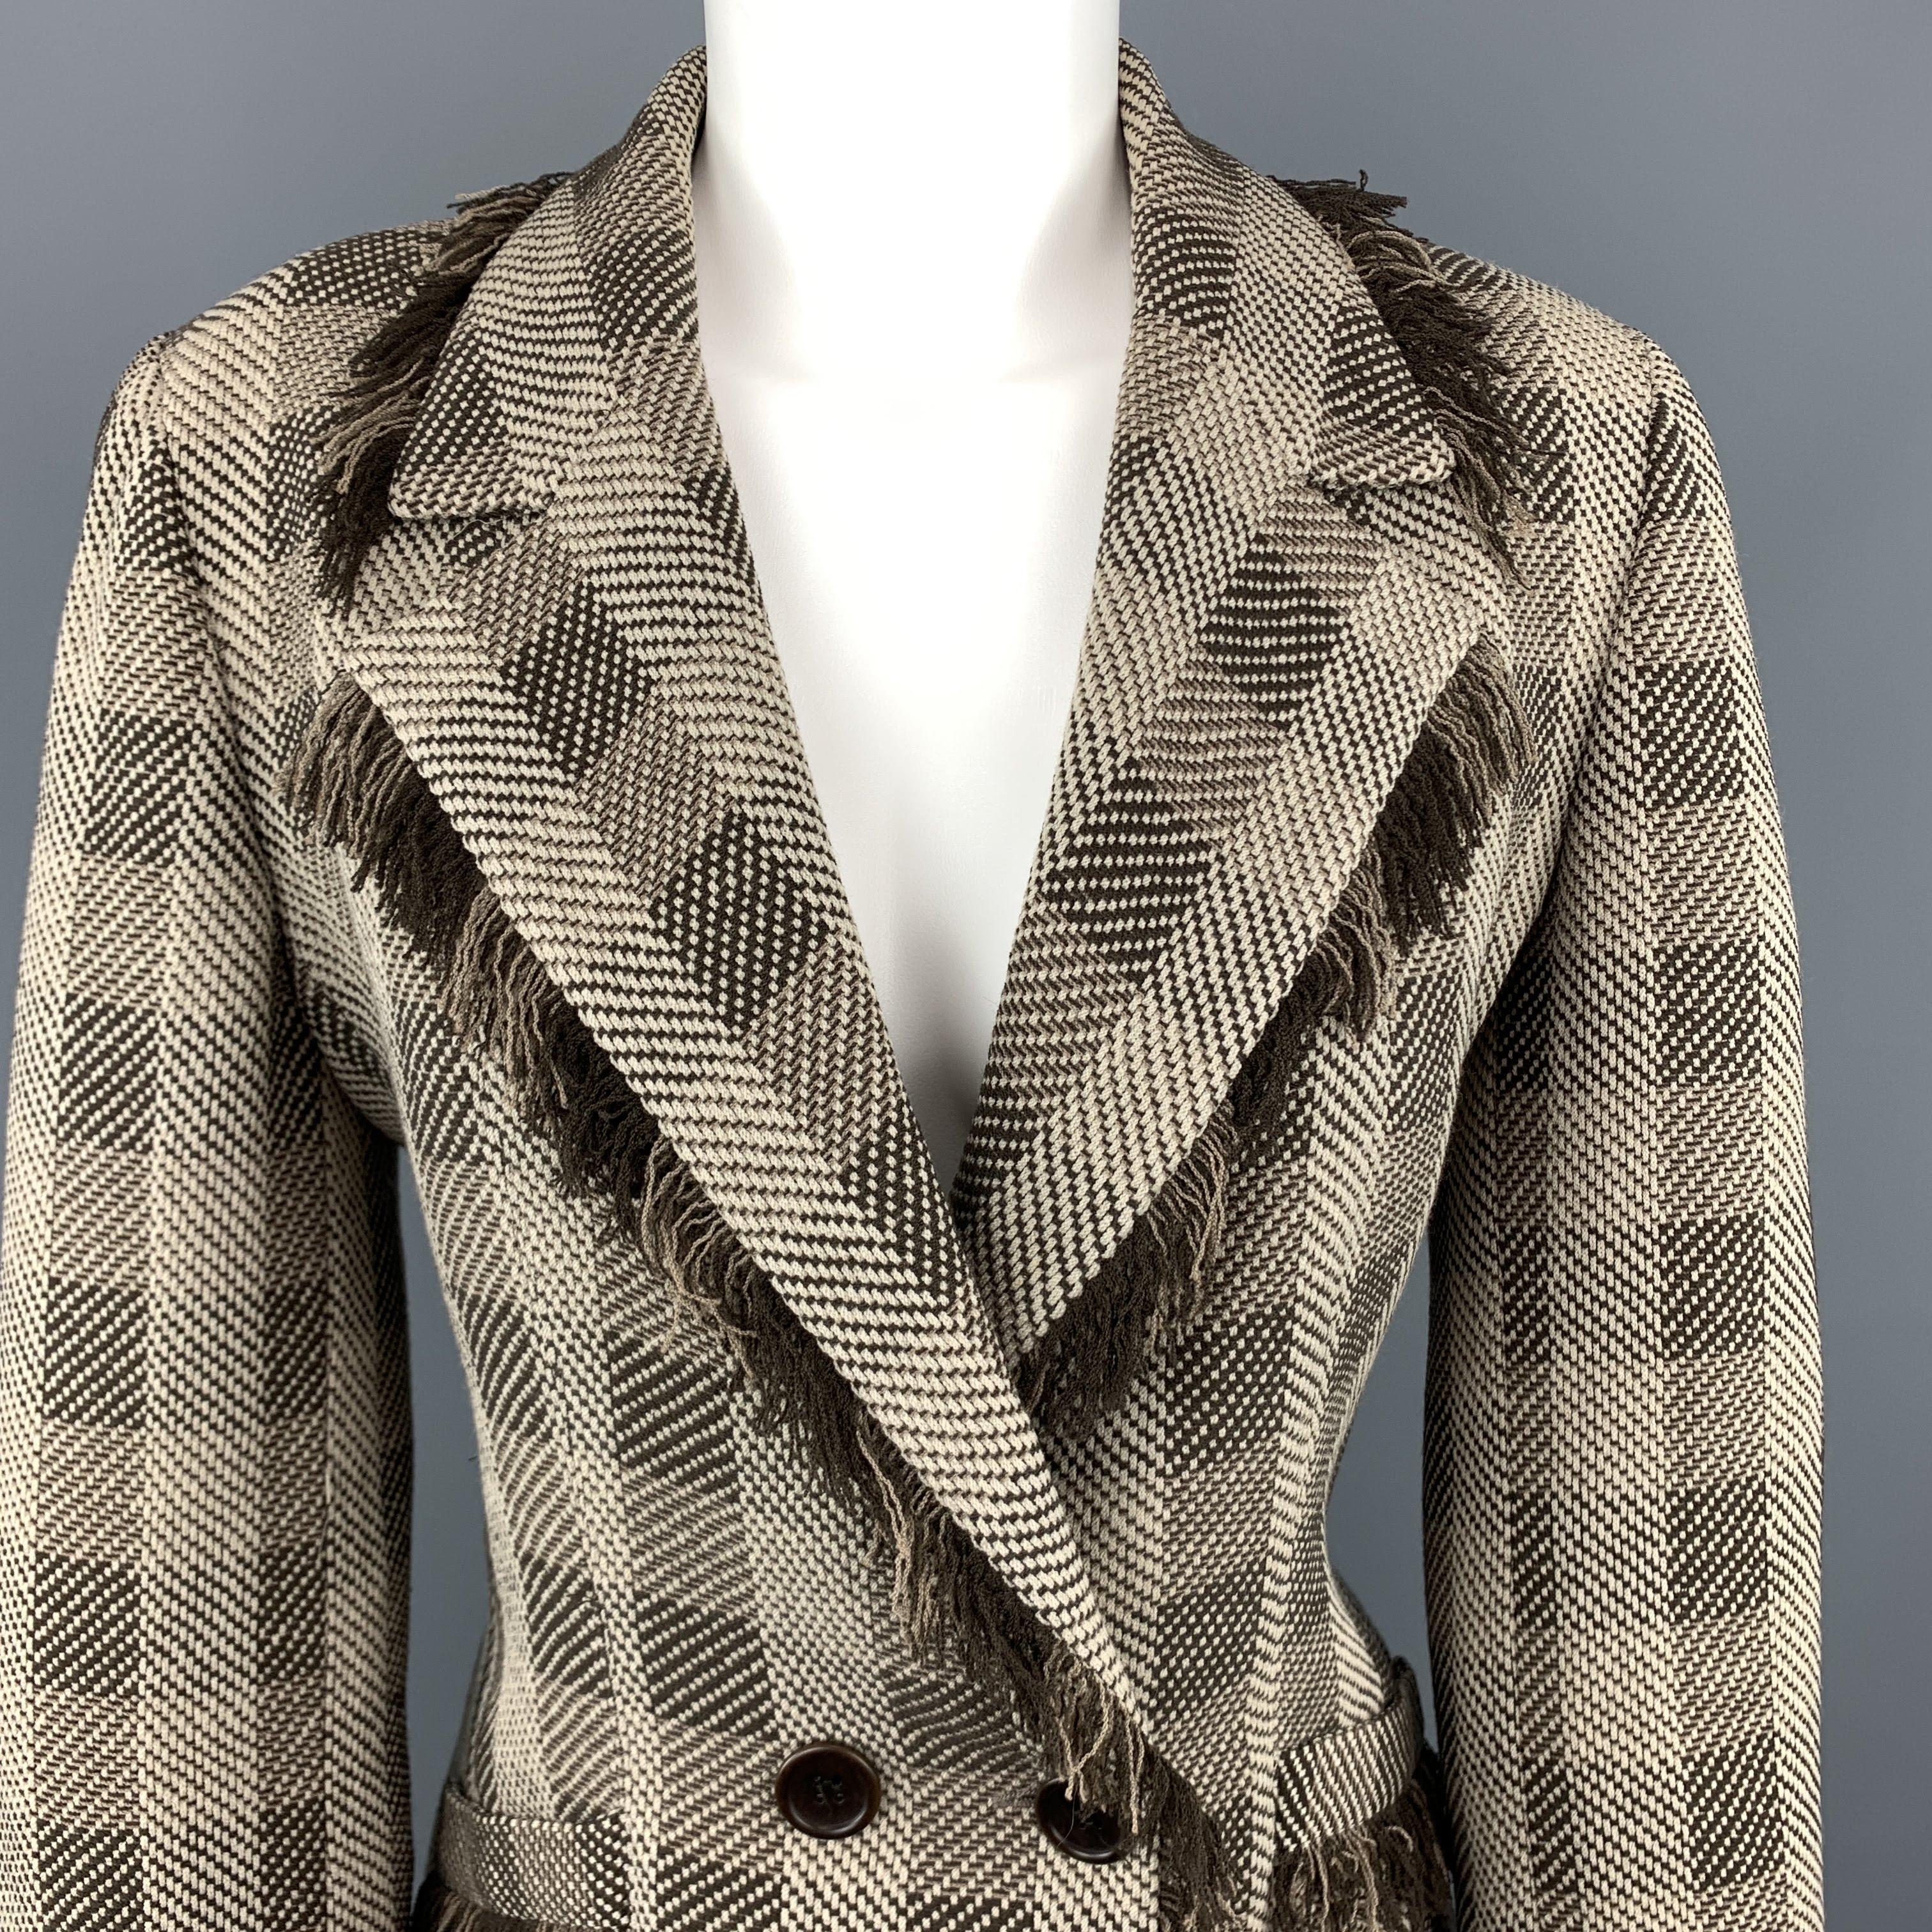 ARMANI COLLEZIONI blazer comes in taupe and brown plaid virgin wool blend fabric with a notch lapel, slanted pockets, and fringe trim throughout. Made in Italy.
 
Excellent Pre-Owned Condition.
Marked: 8
 
Measurements:
 
Shoulder: 15 in.
Bust: 40